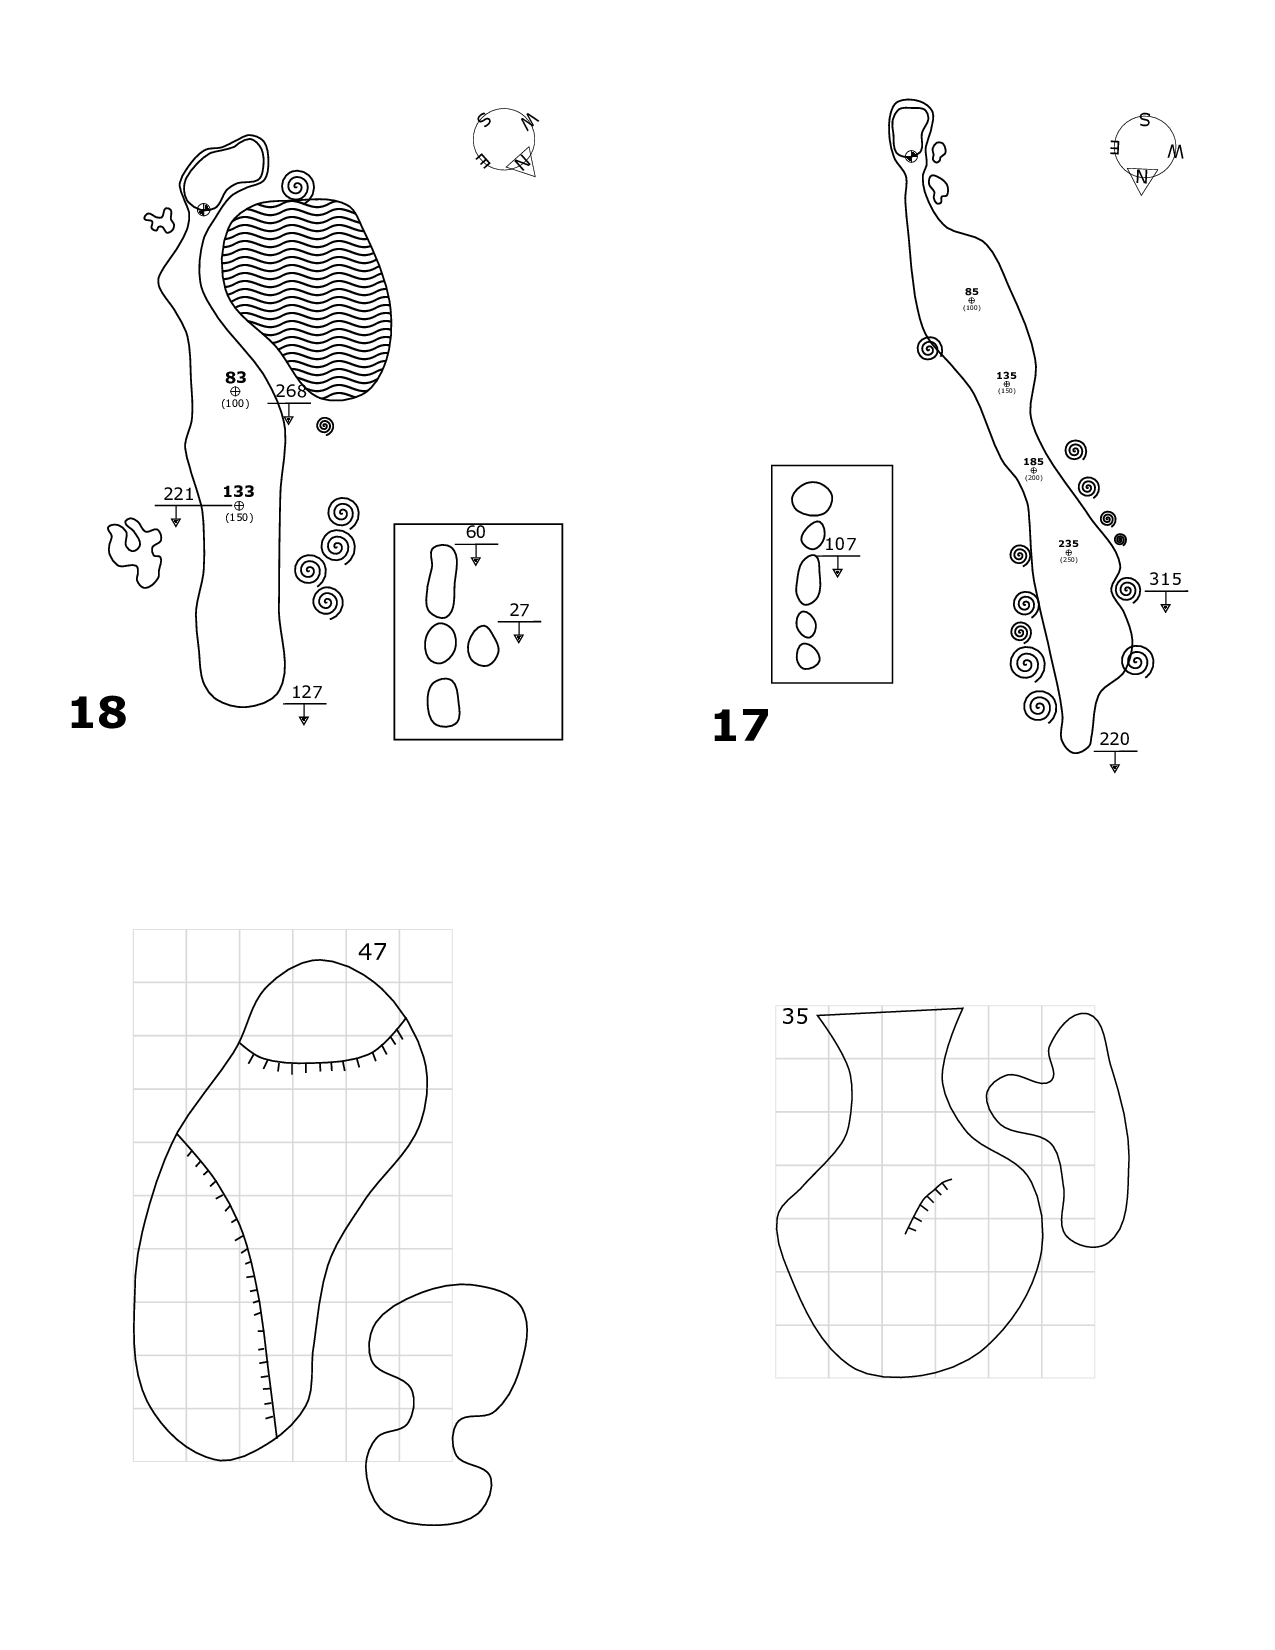 Bretwood Golf Course - North yardage book page 3